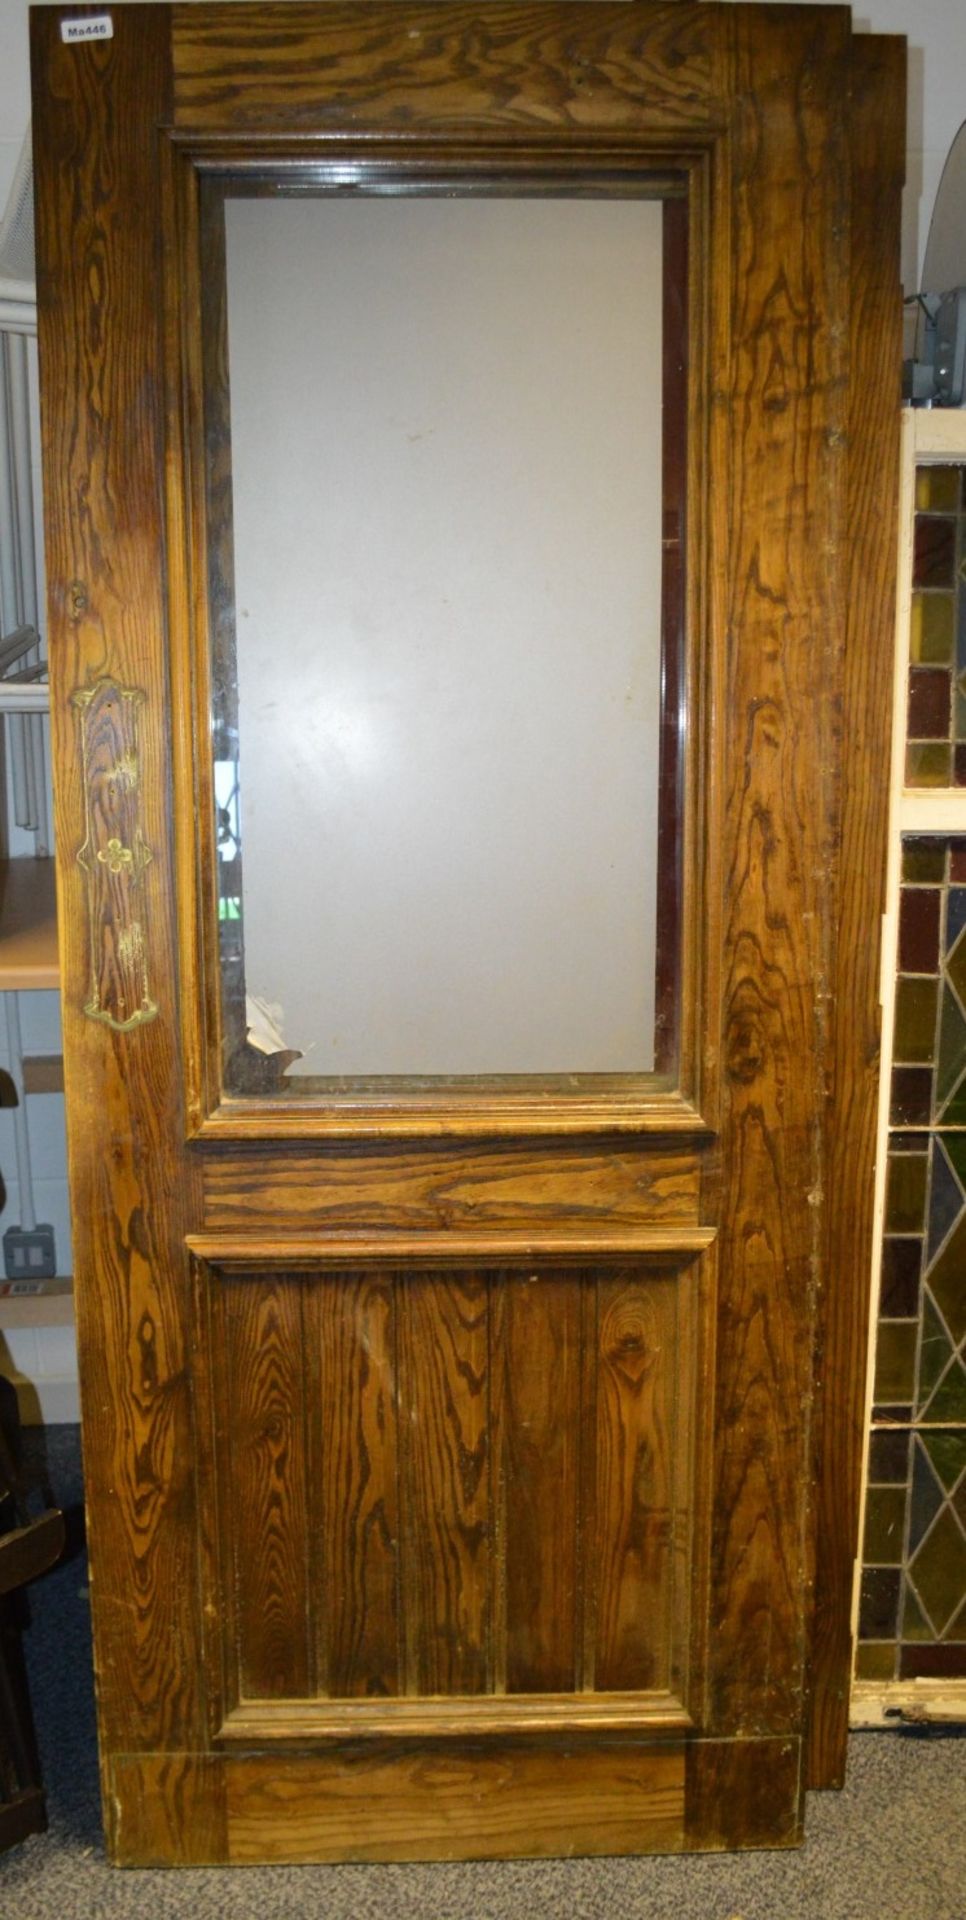 2 x Traditional Restaurant / Pub Bar Doors - Dimensions (approx) W82 x H201 x D4.5cm - Used, In Good - Image 5 of 7